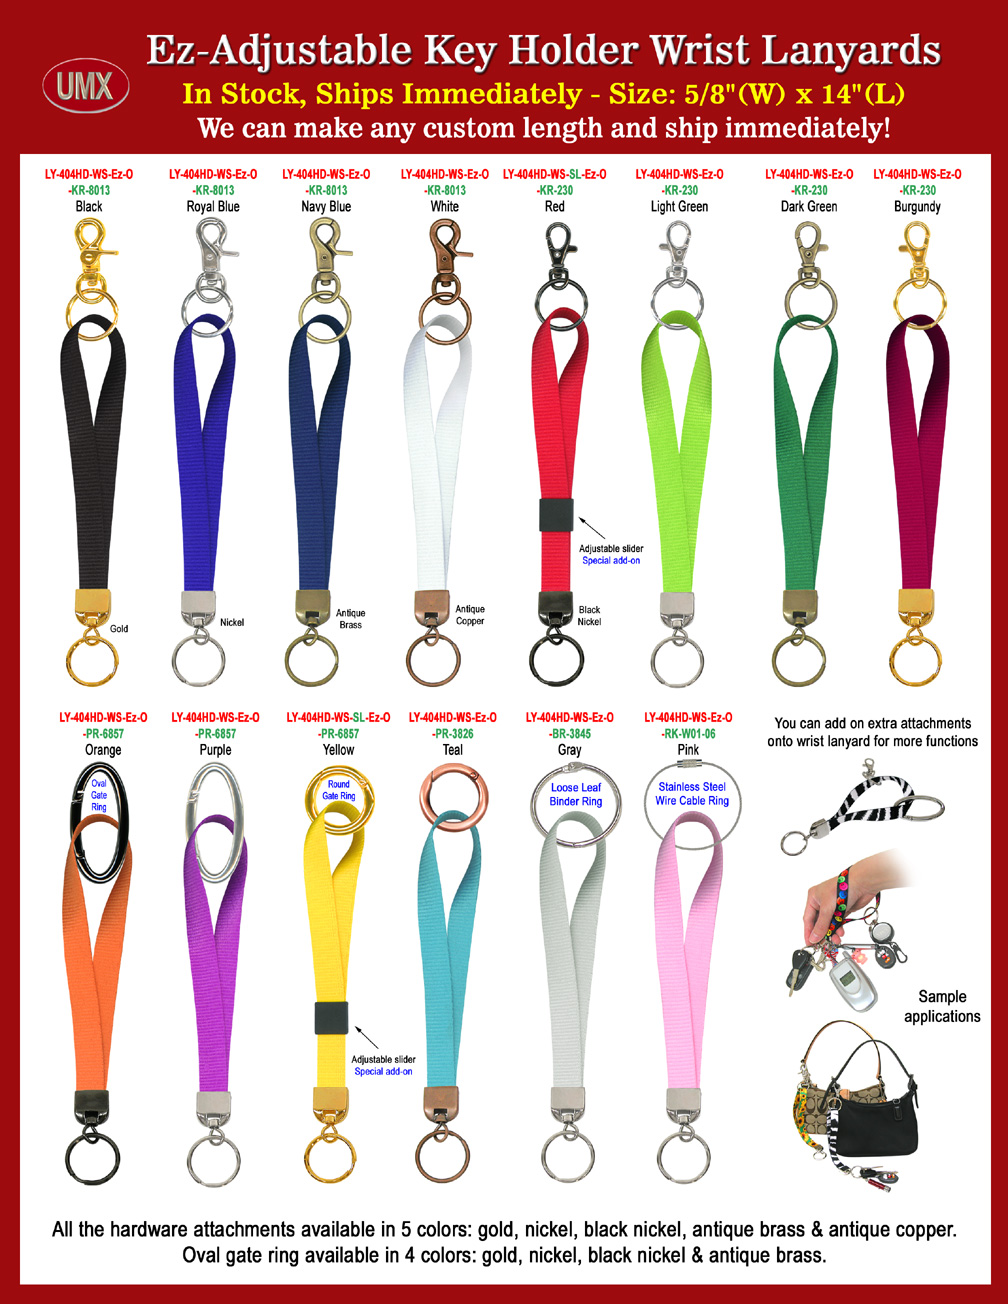 Ez-Adjustable Plain Color 5/8" Keychain Wrist Lanyards. Huge selection of keychain straps and key holder hardware available for different combination.